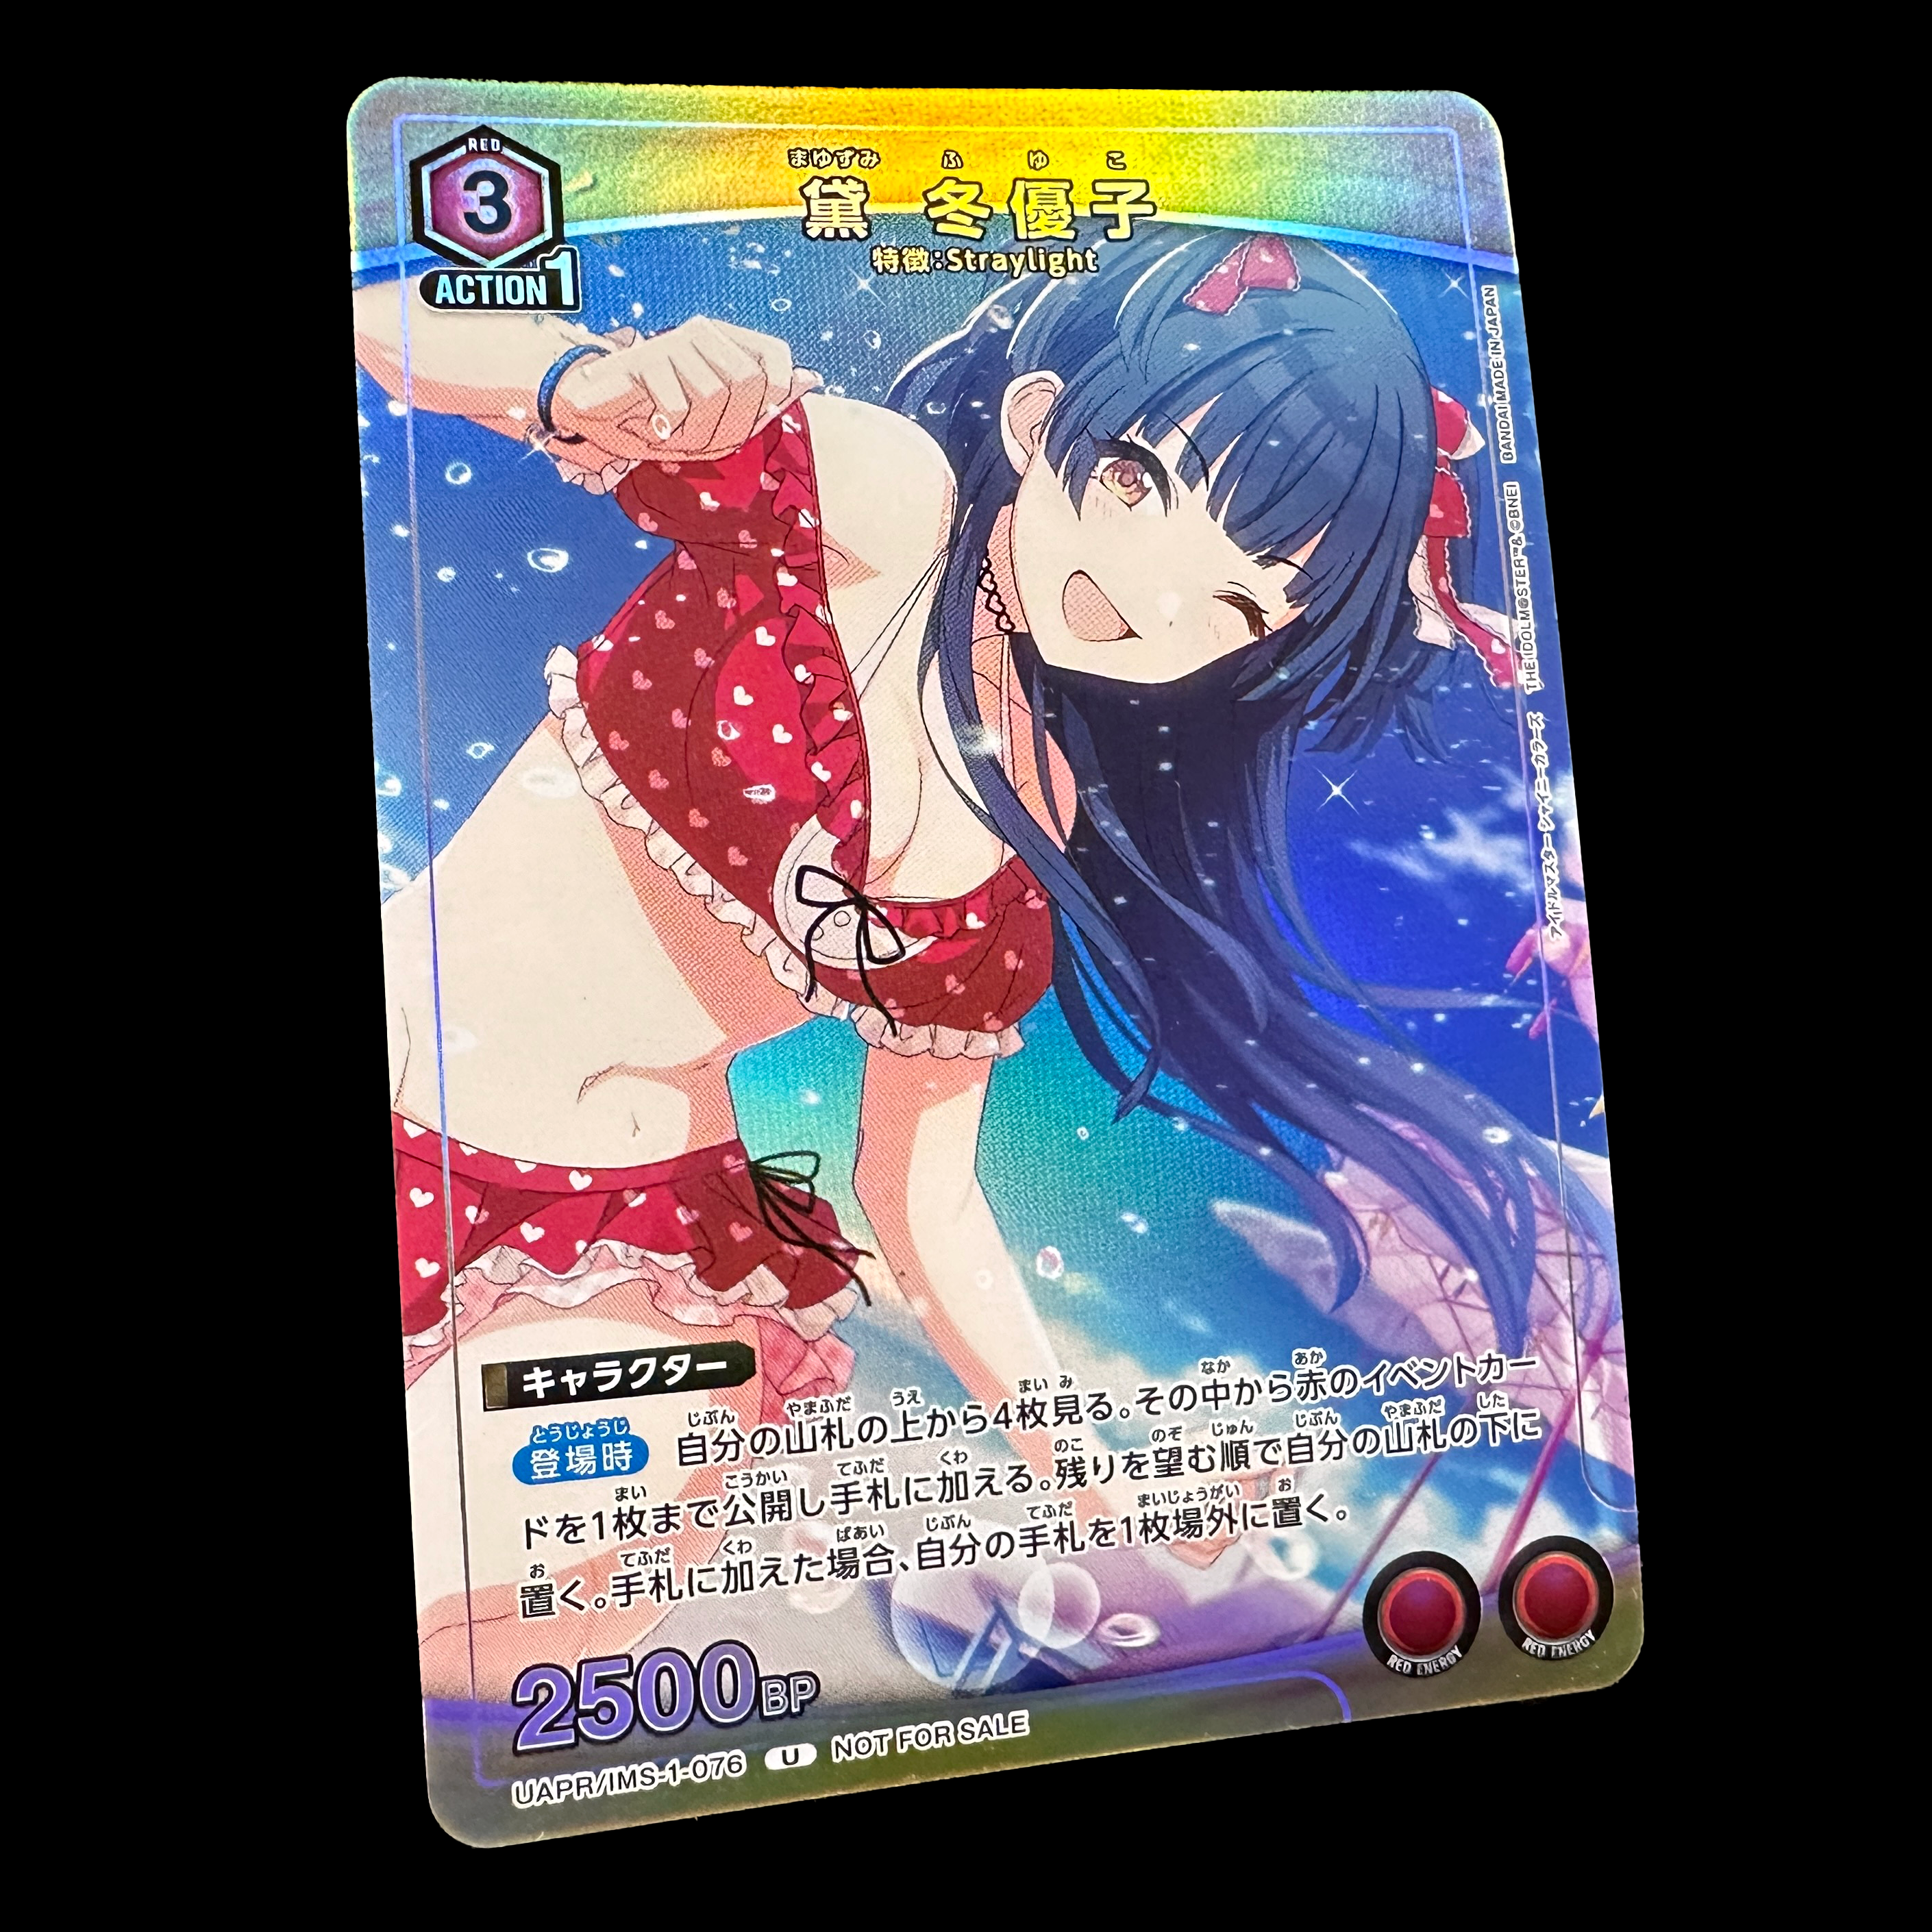 TRADING CARD GAME UNION ARENA UAPR/IMS-1-076  Promotional card sold with the June 2023 issue of VJump magazine released April 21 2023.  THE IDOLM@STER SHINYCOLORS - Mayuzumi Fuyuko Straylight